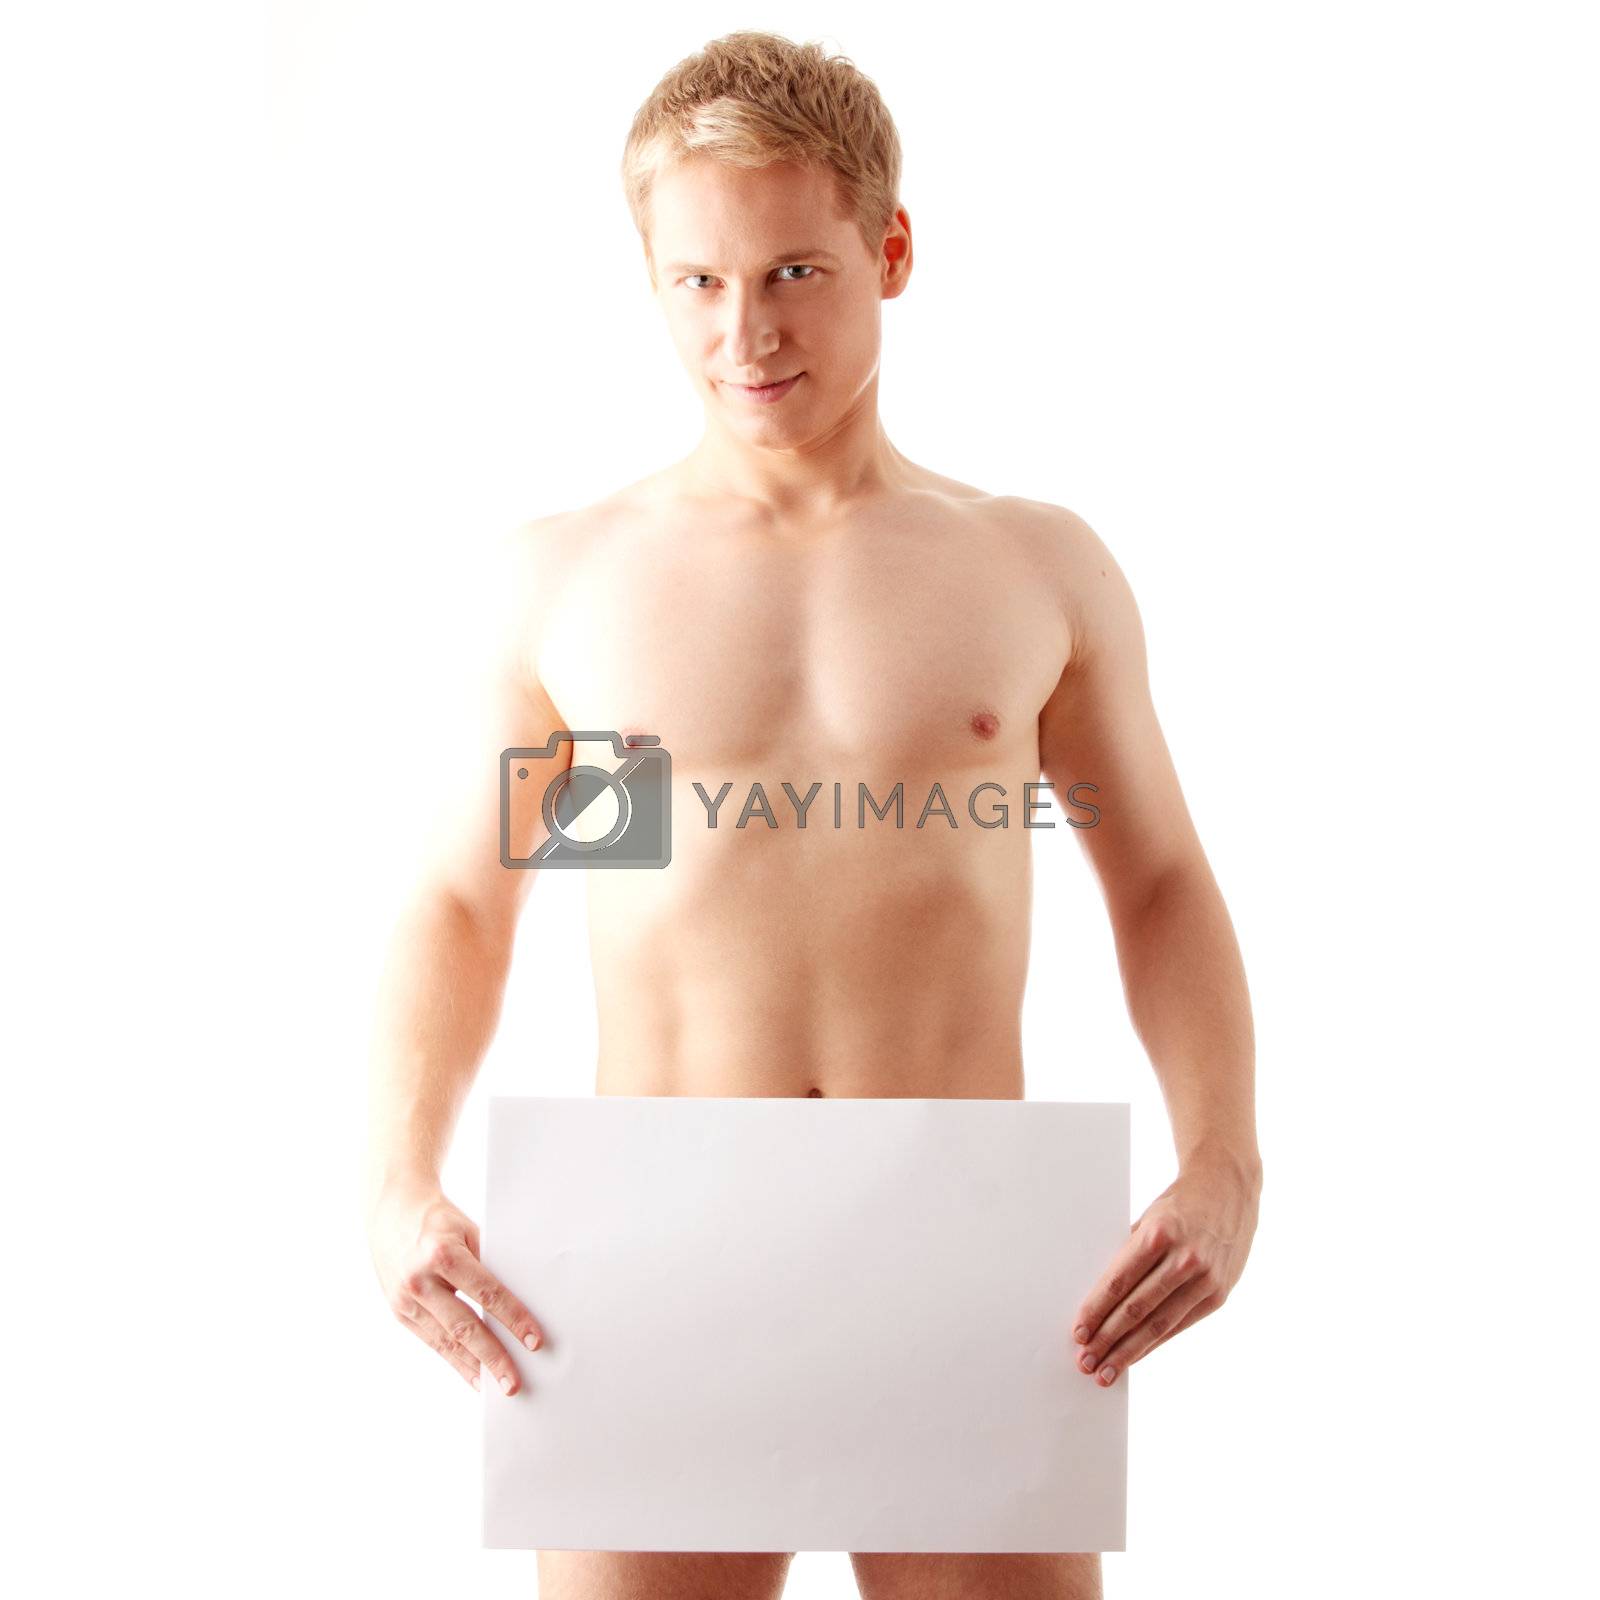 Royalty free image of Nude man covering by BDS